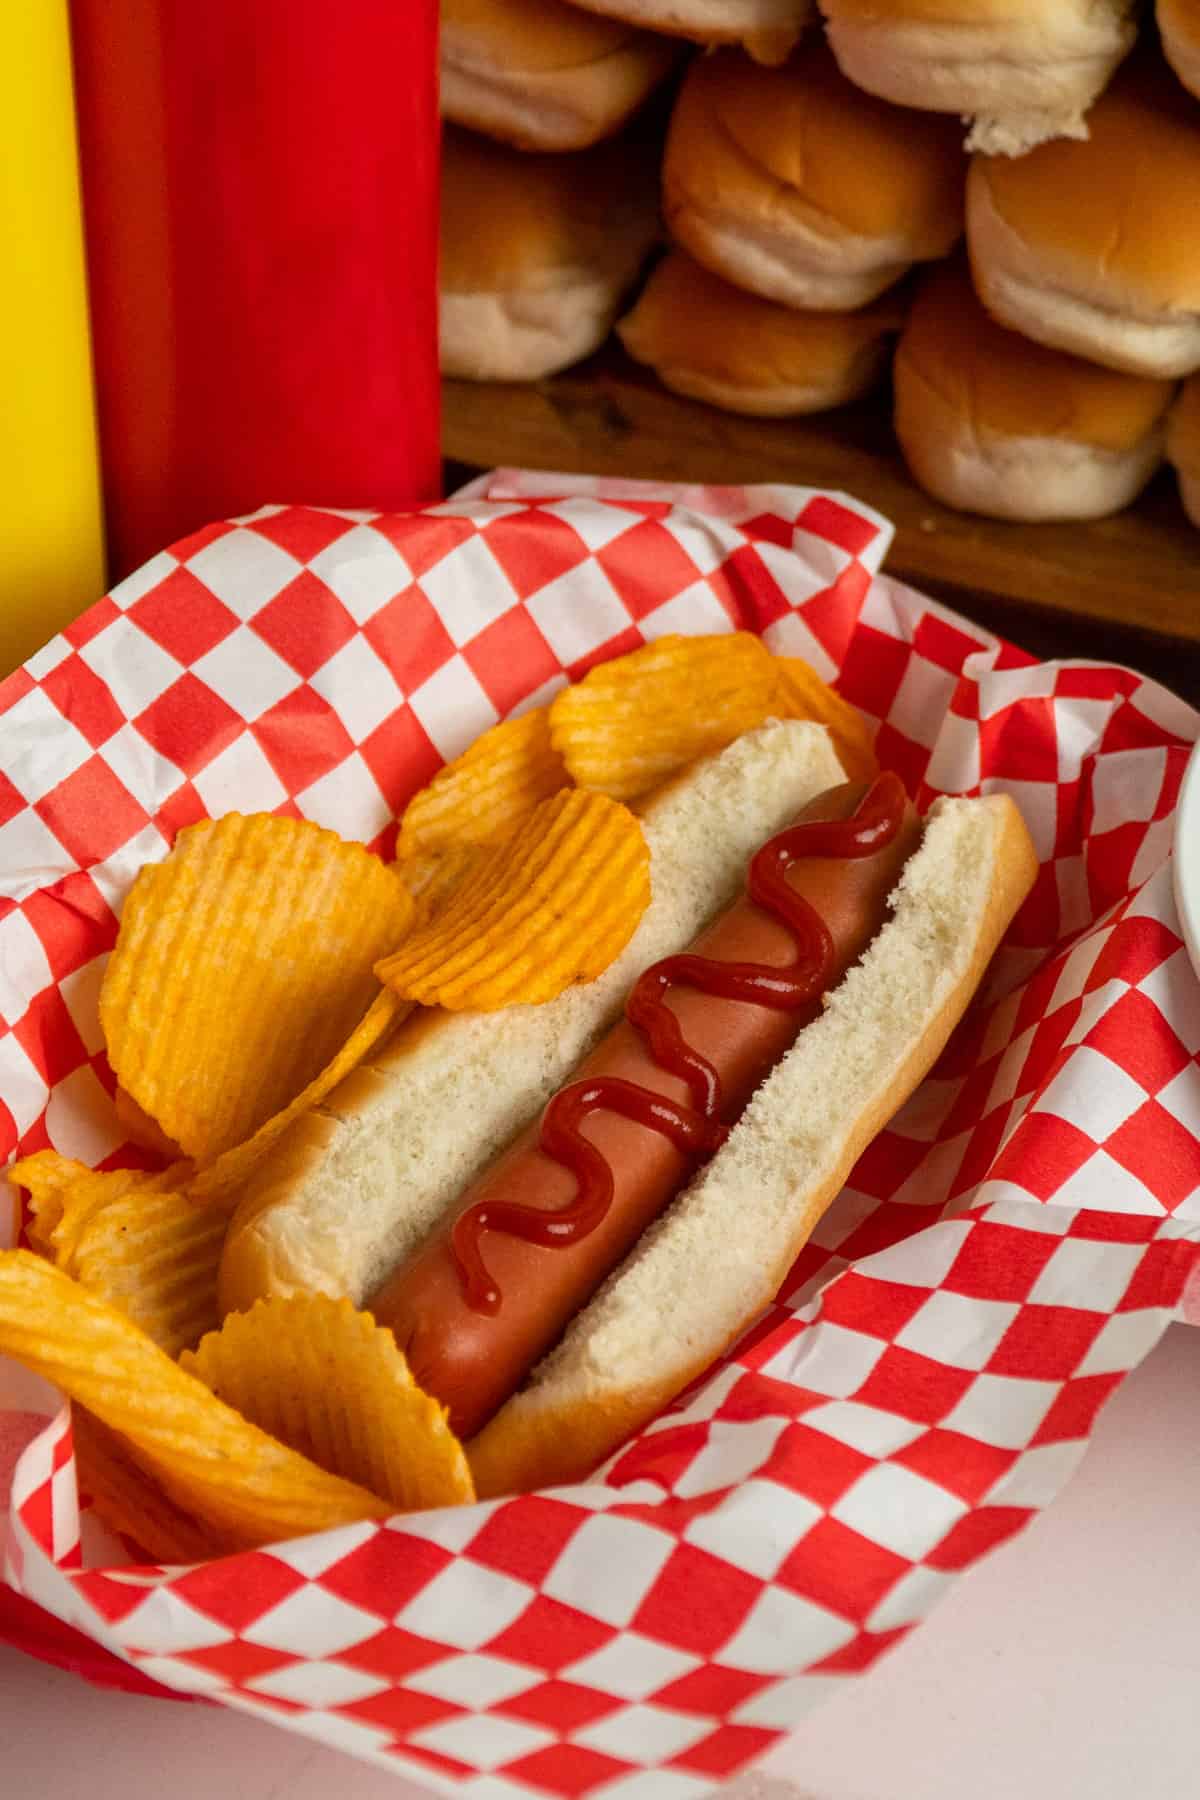 Close up of a hot dog with ketchup on it.